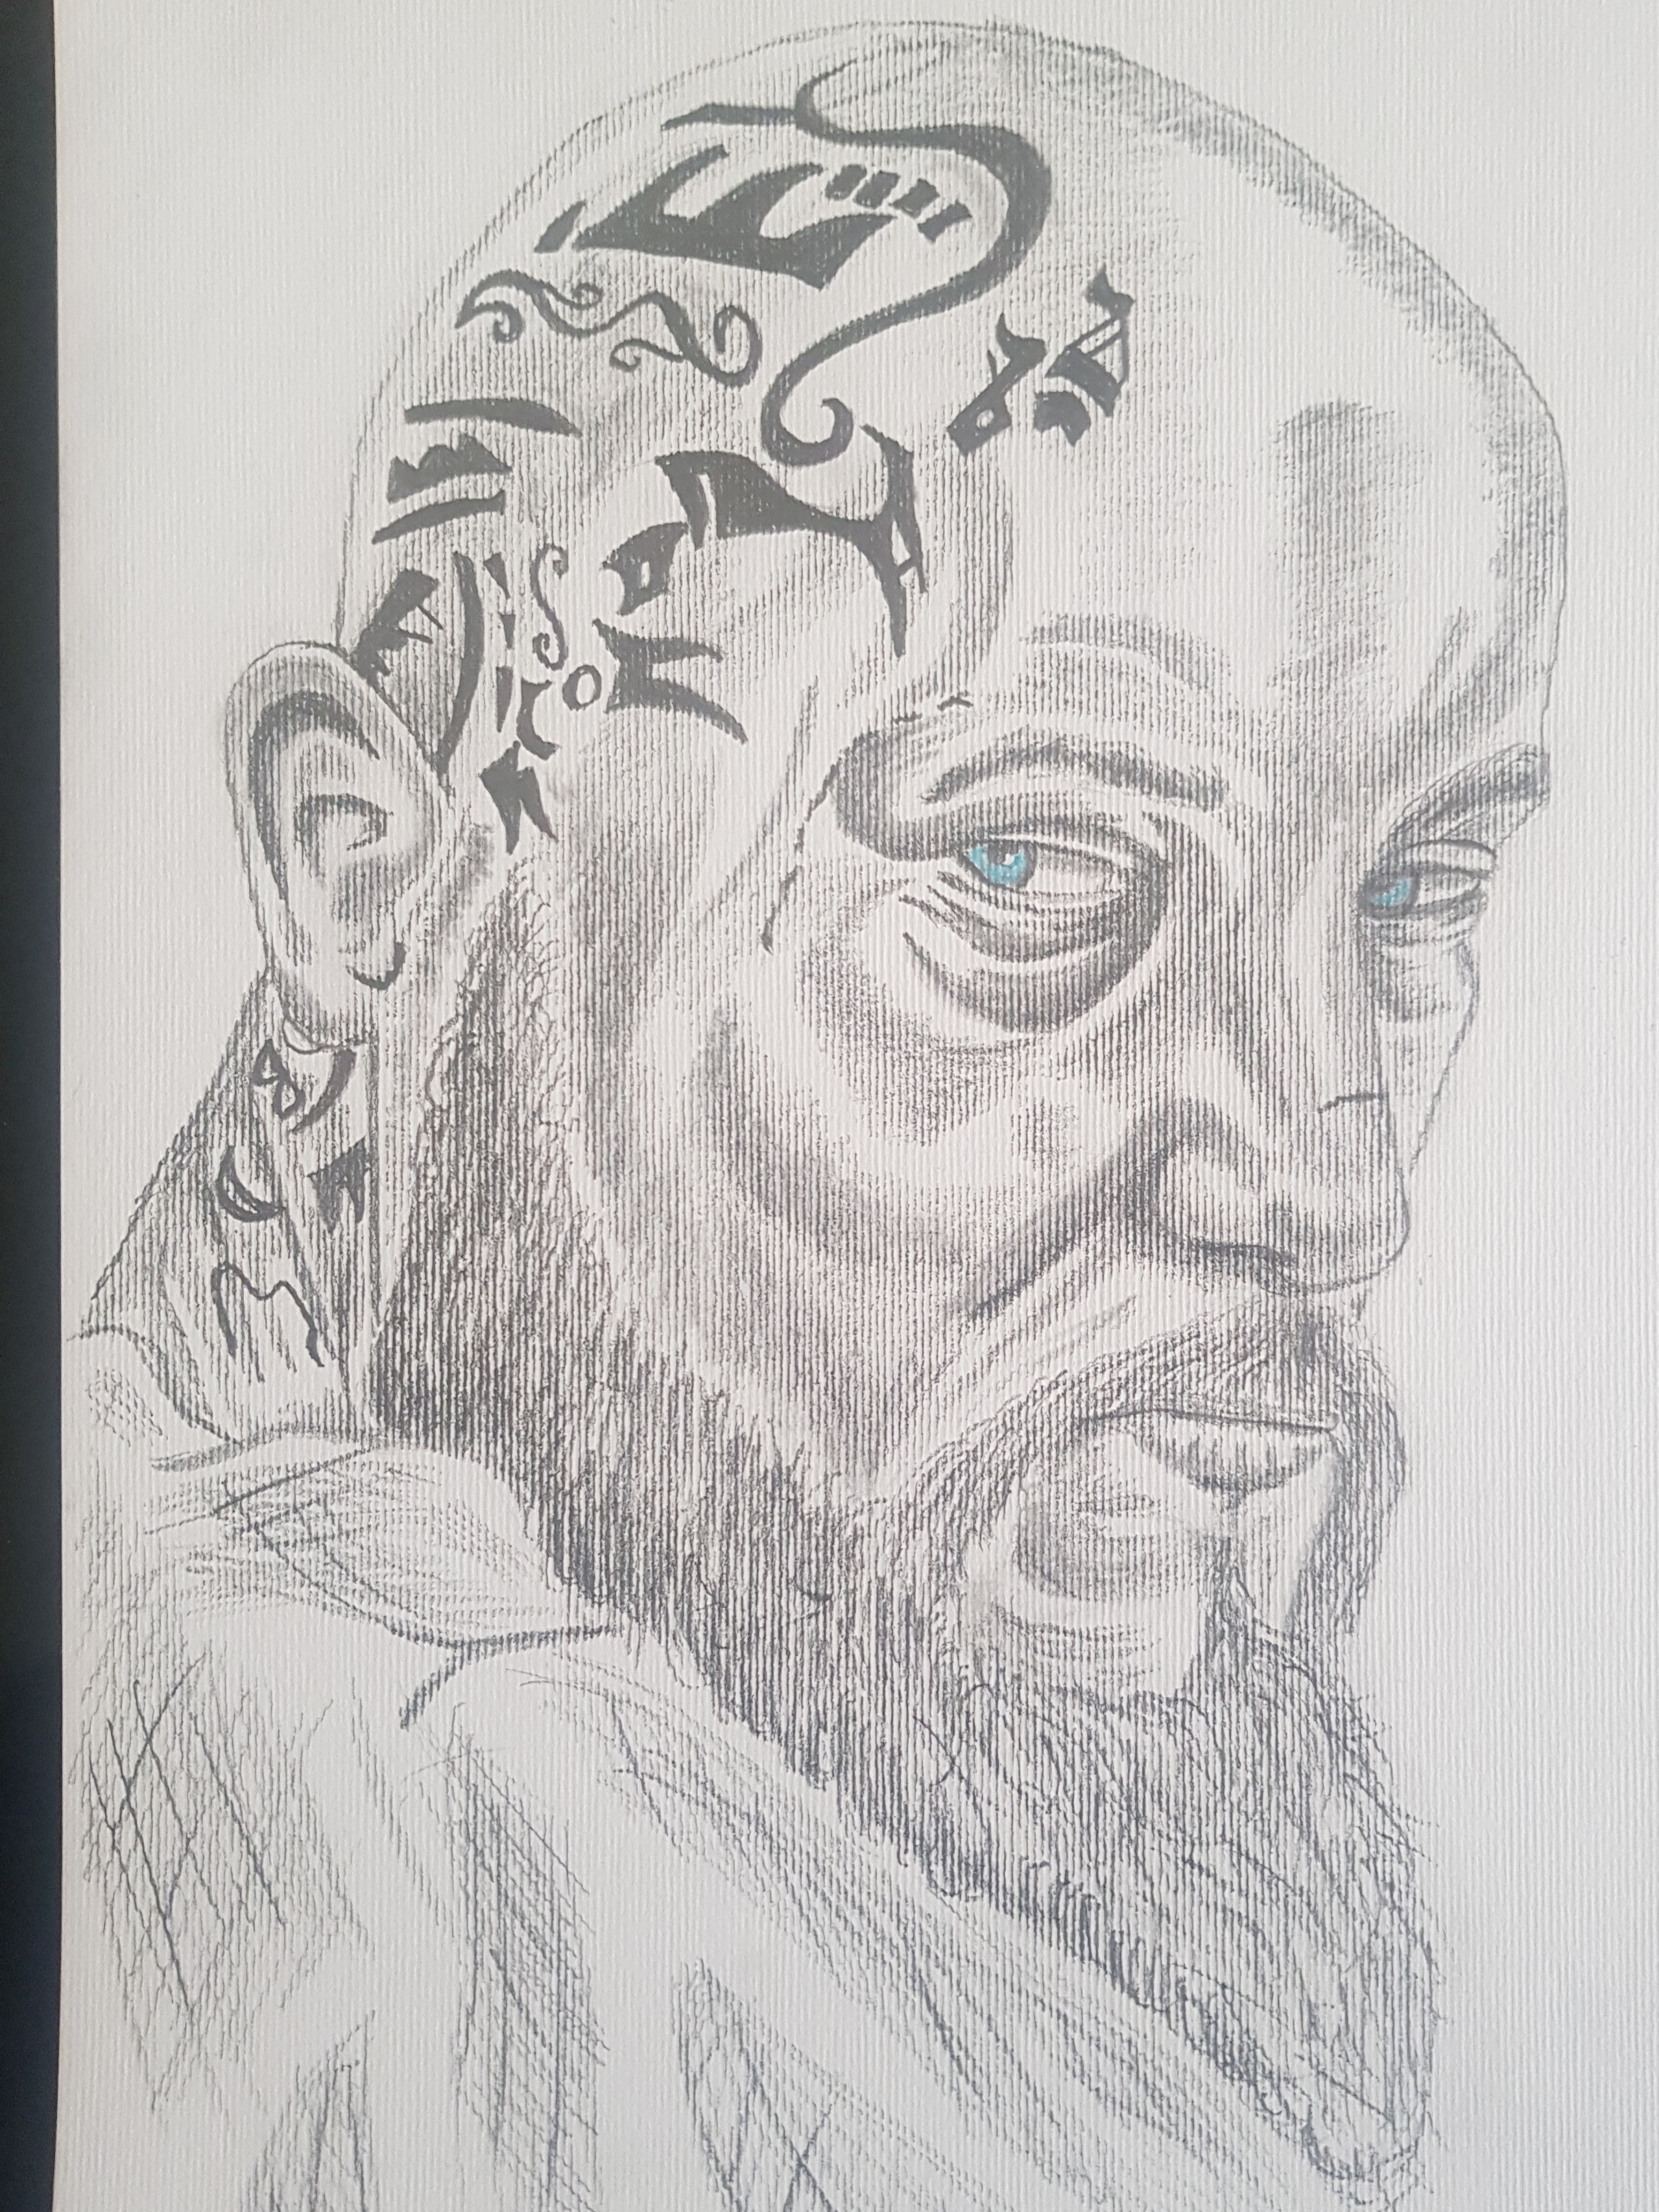 Ragnar from the vikings